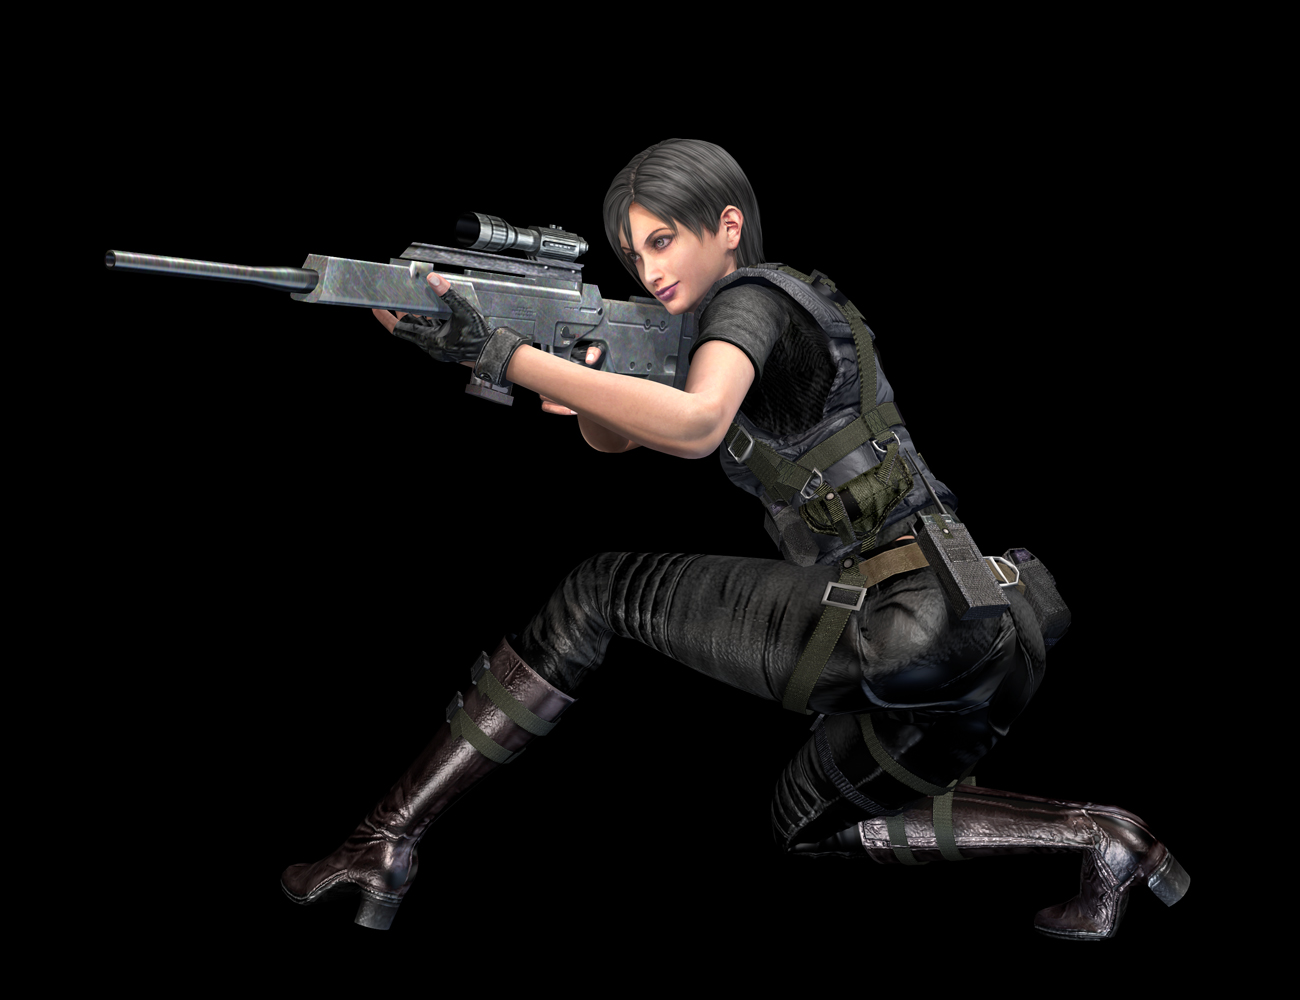 Evolution of Ada Wong in Resident Evil Games from RE2 to RE4